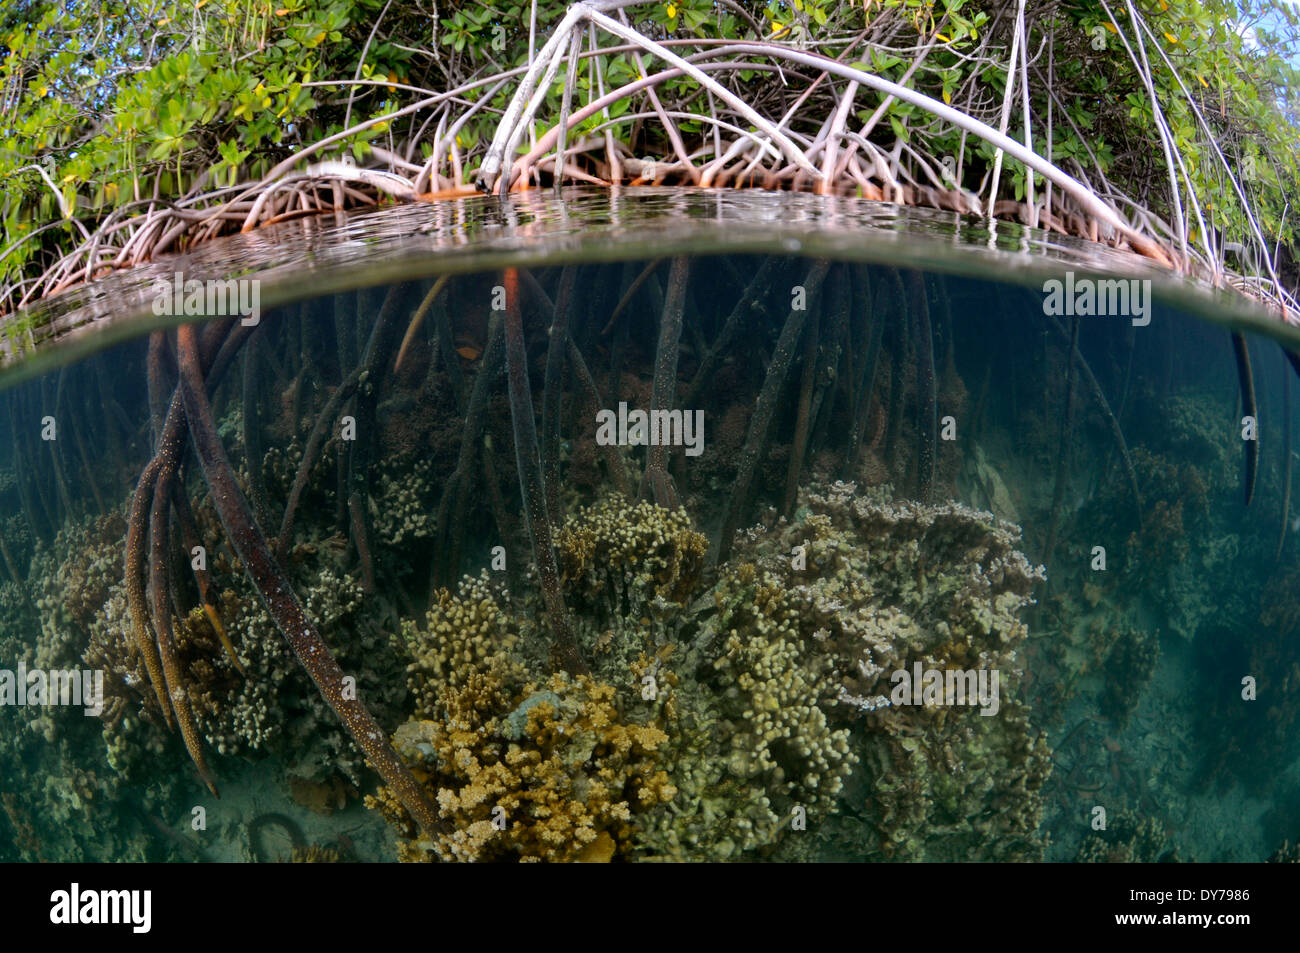 Coral reef growing over the roots of the mangrove trees, Coconut Island, Kaneohe Bay, Oahu, Hawaii, USA Stock Photo